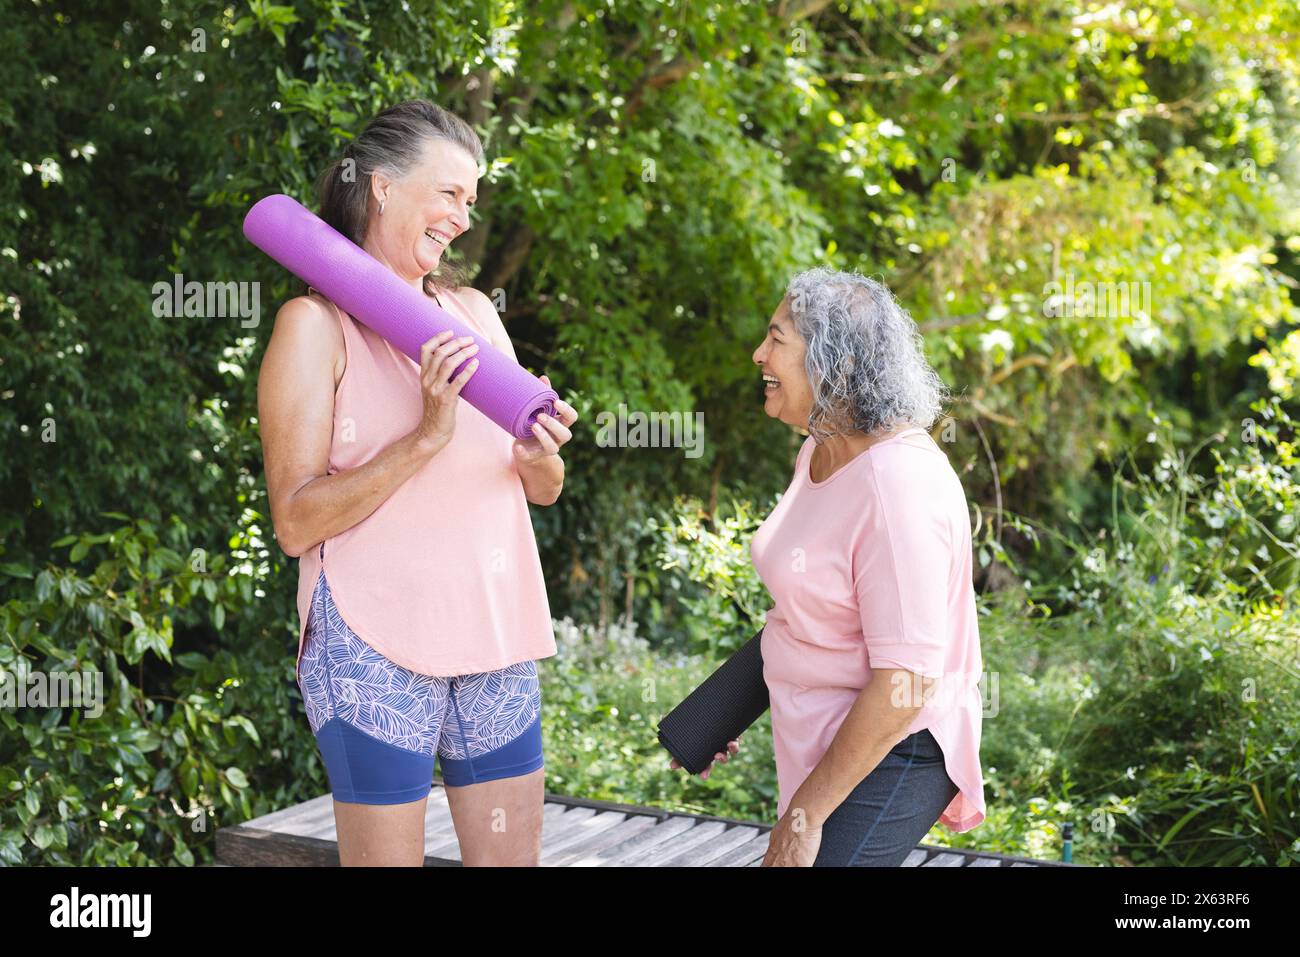 Outdoors, diverse senior female friends holding yoga mats, chatting happily Stock Photo